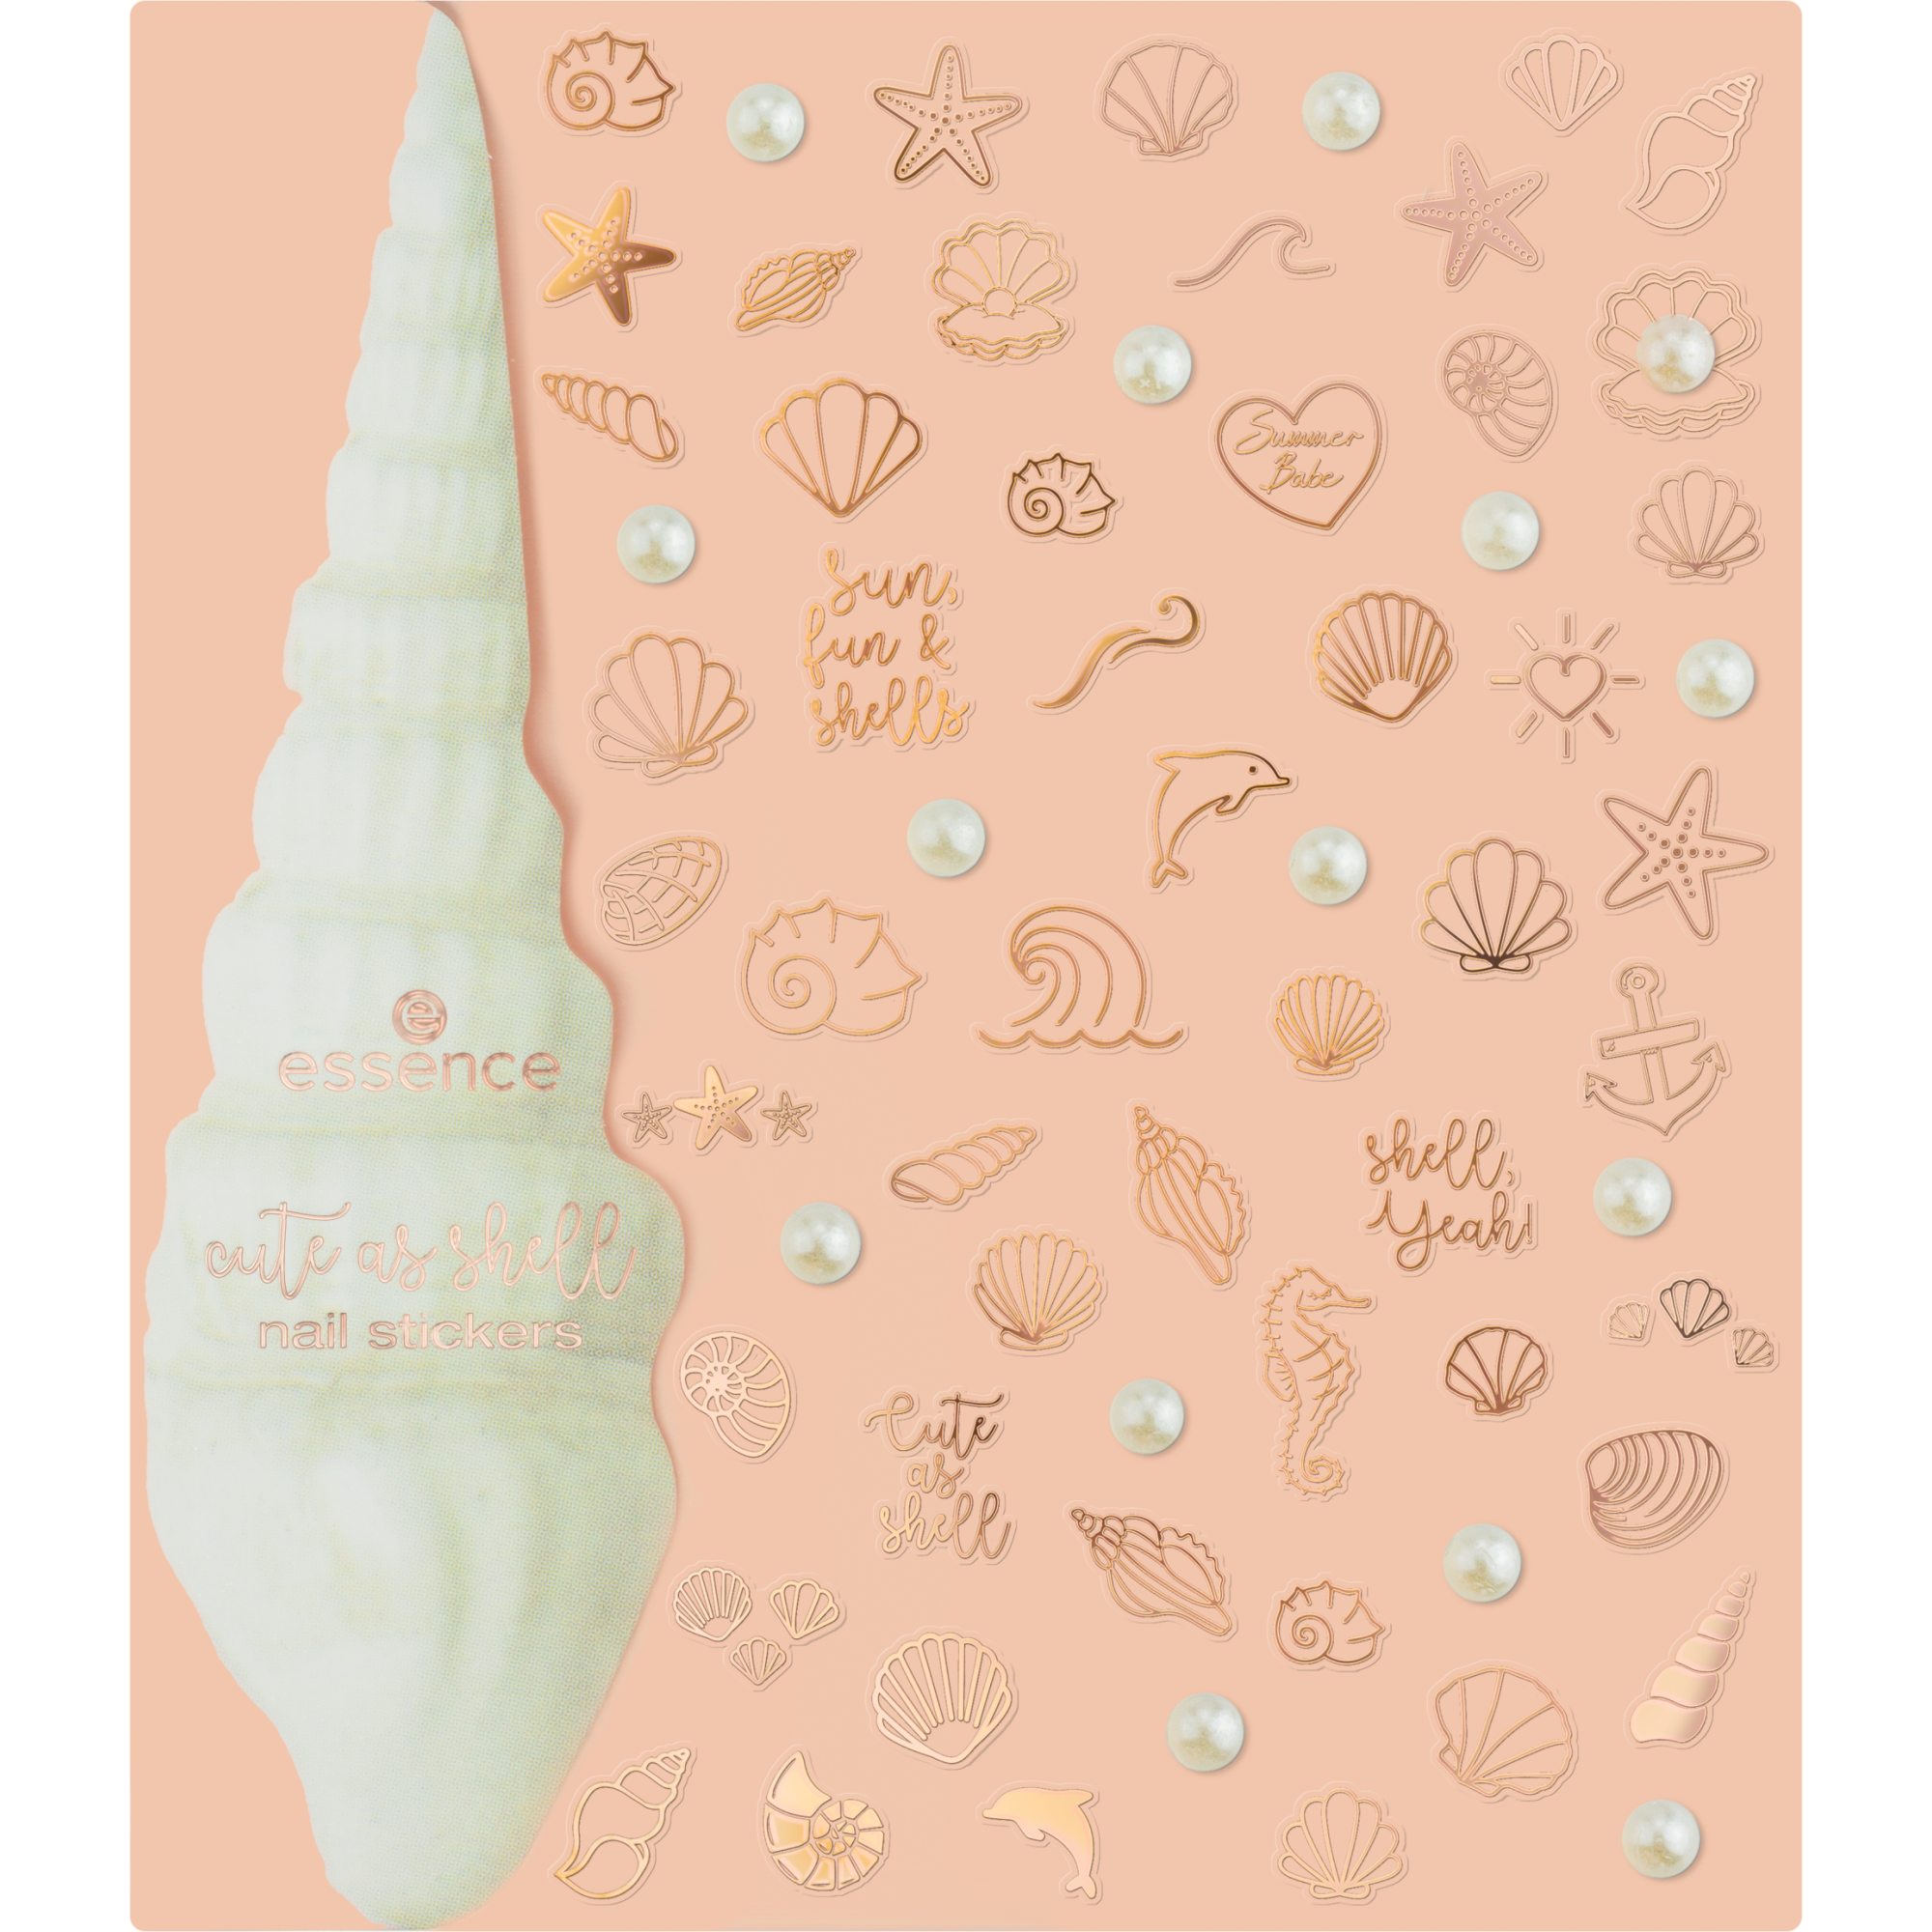 cute as shell nail stickers